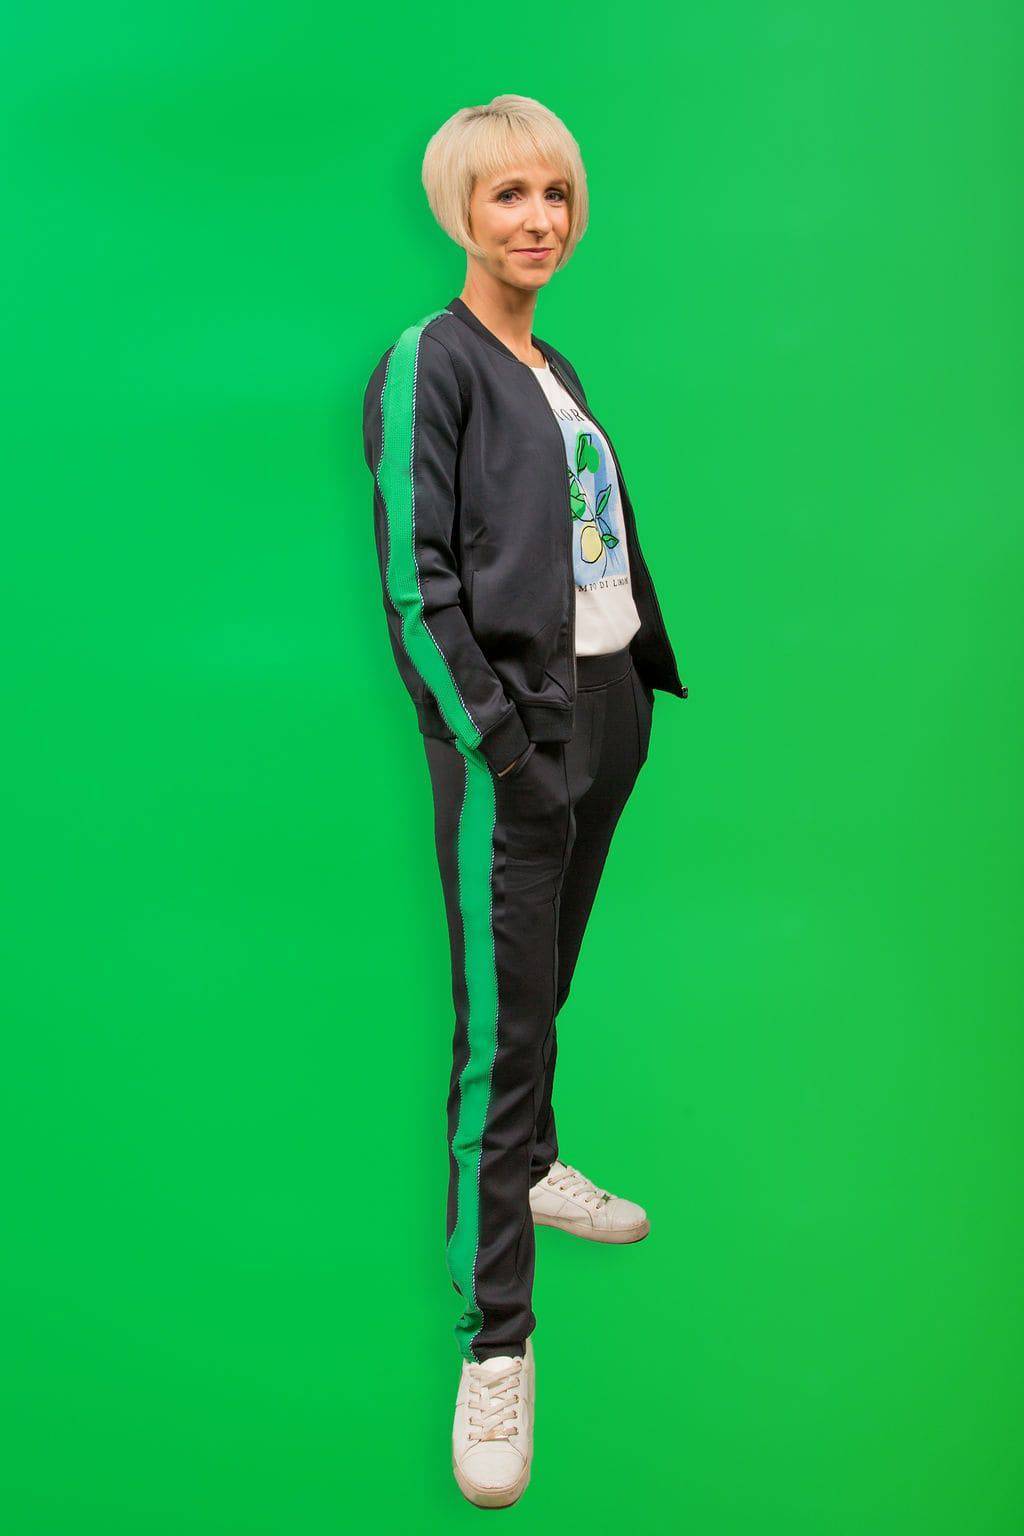 Black Garcia Jacket with green stripe - Your Style Your Story